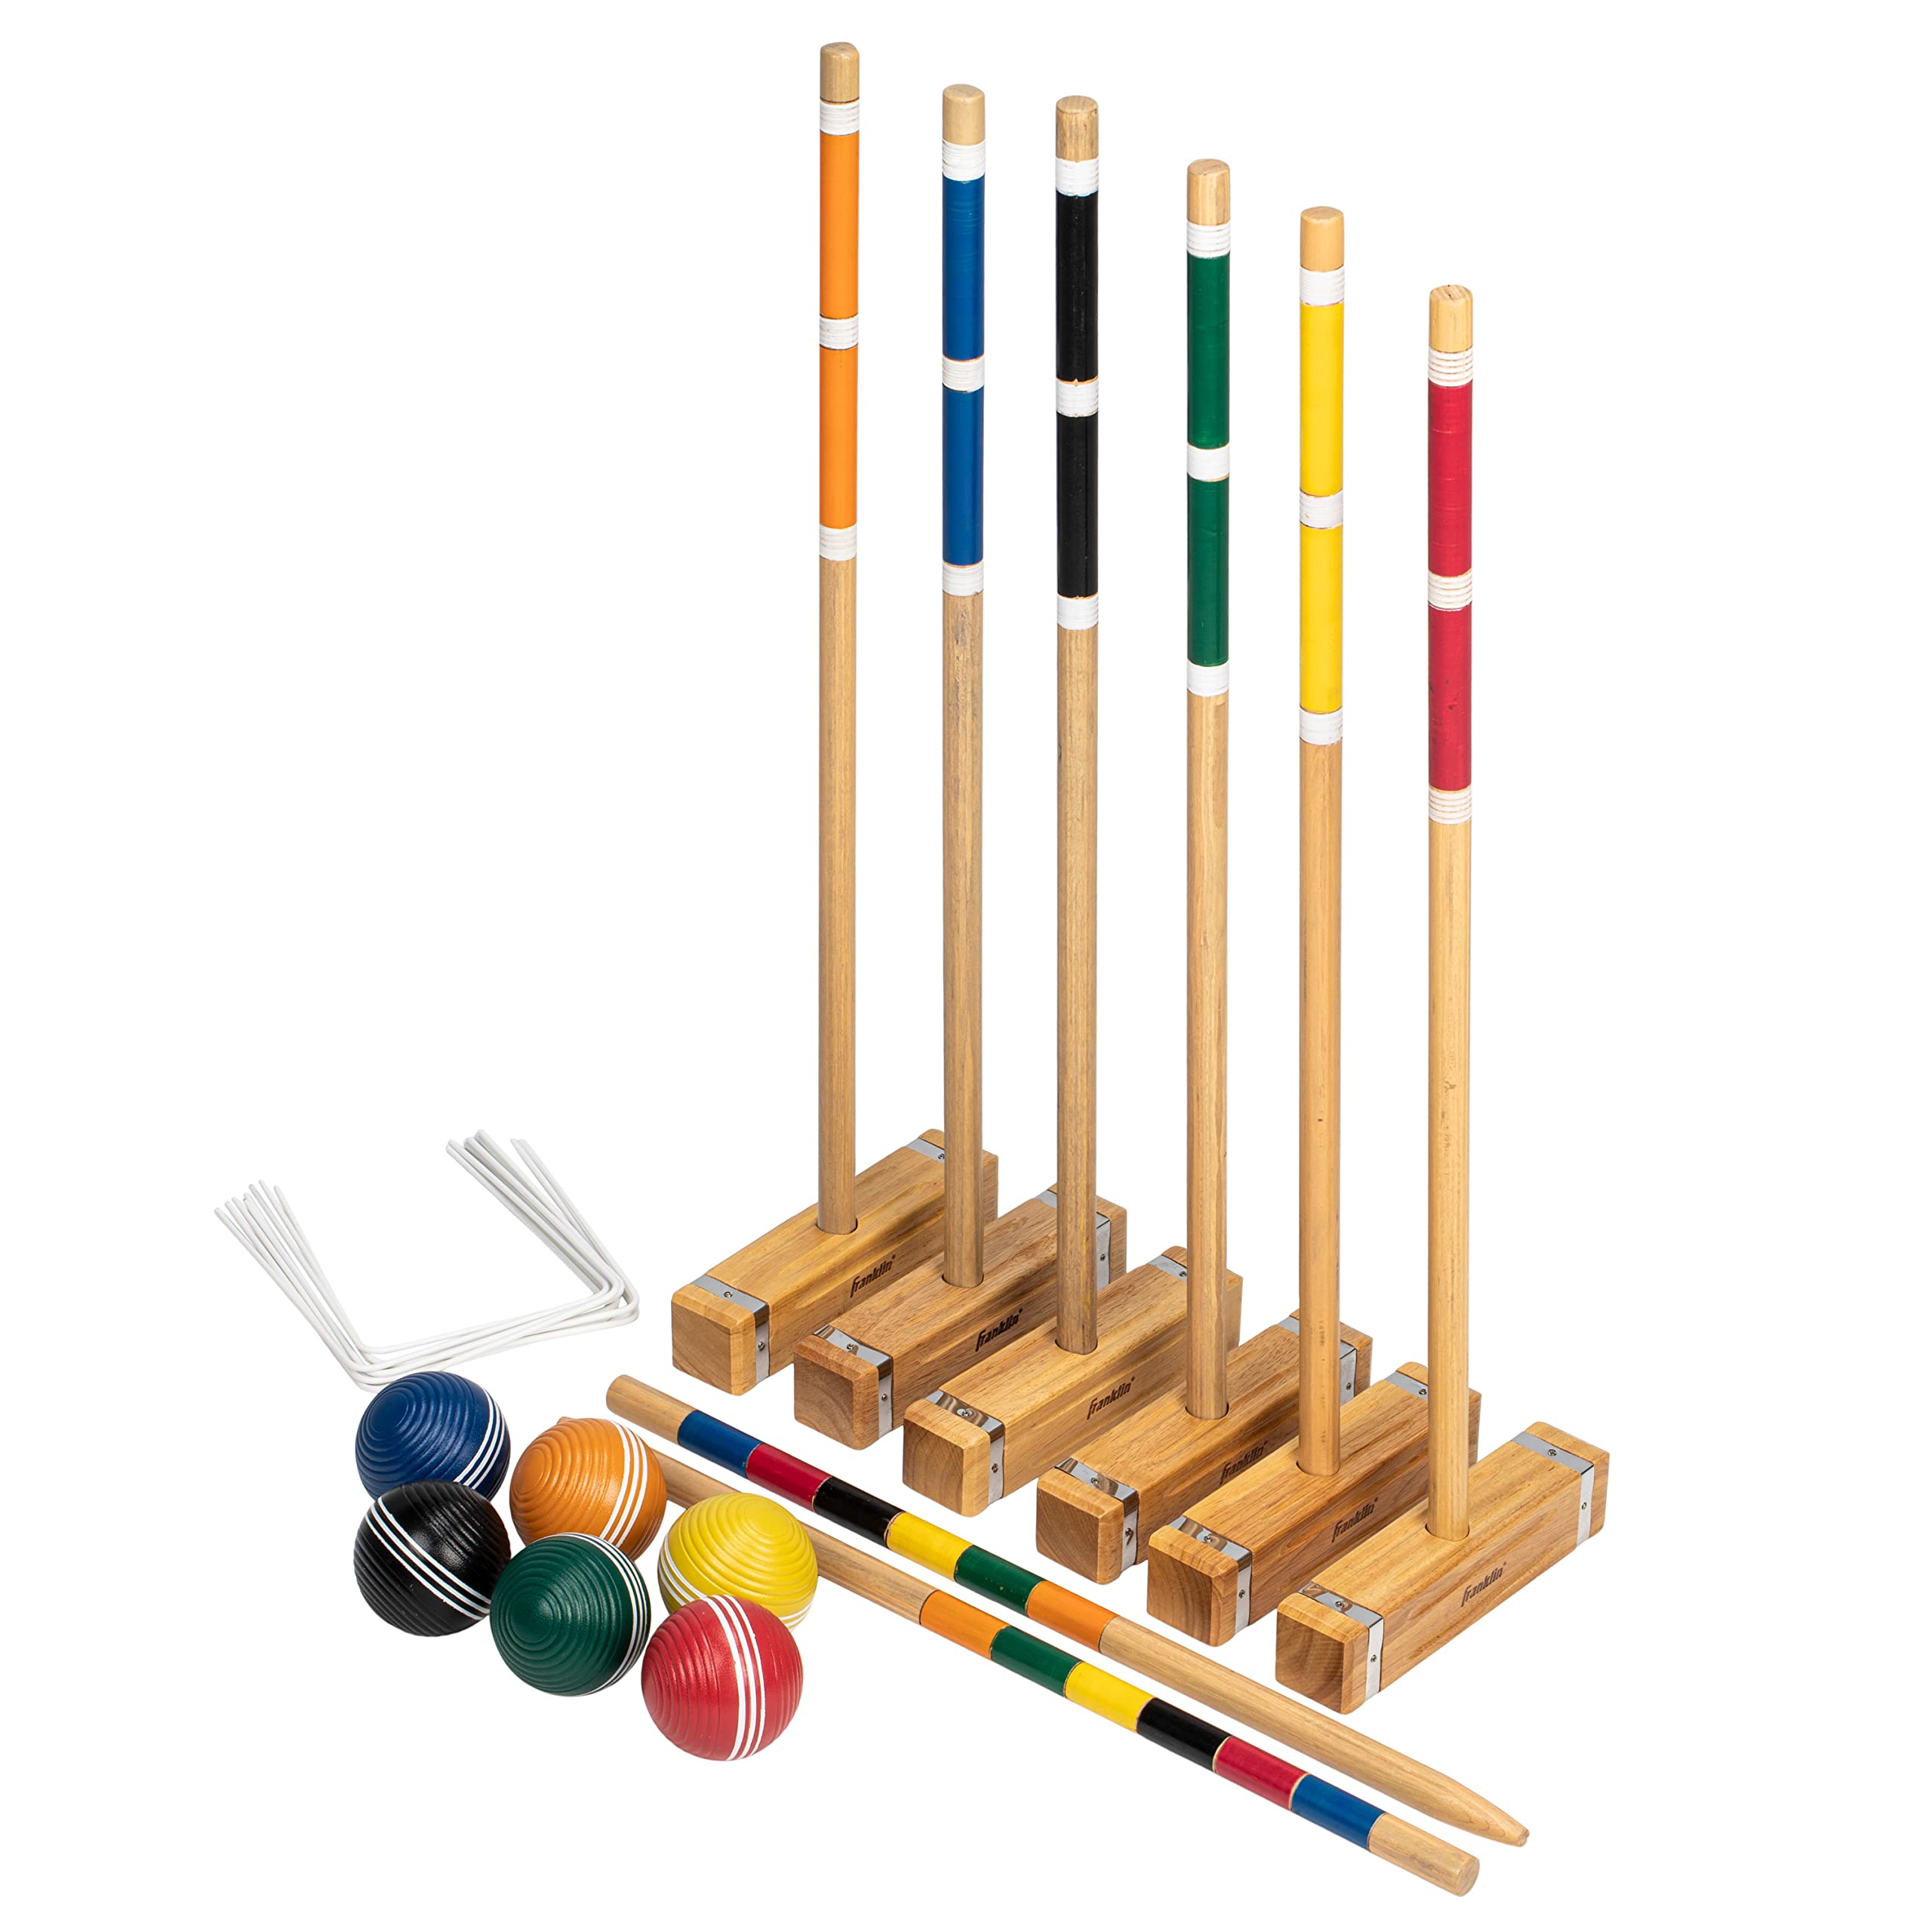 24-Pc Franklin Sports Classic Vintage Style Croquet Set $32.65 + Free Shipping